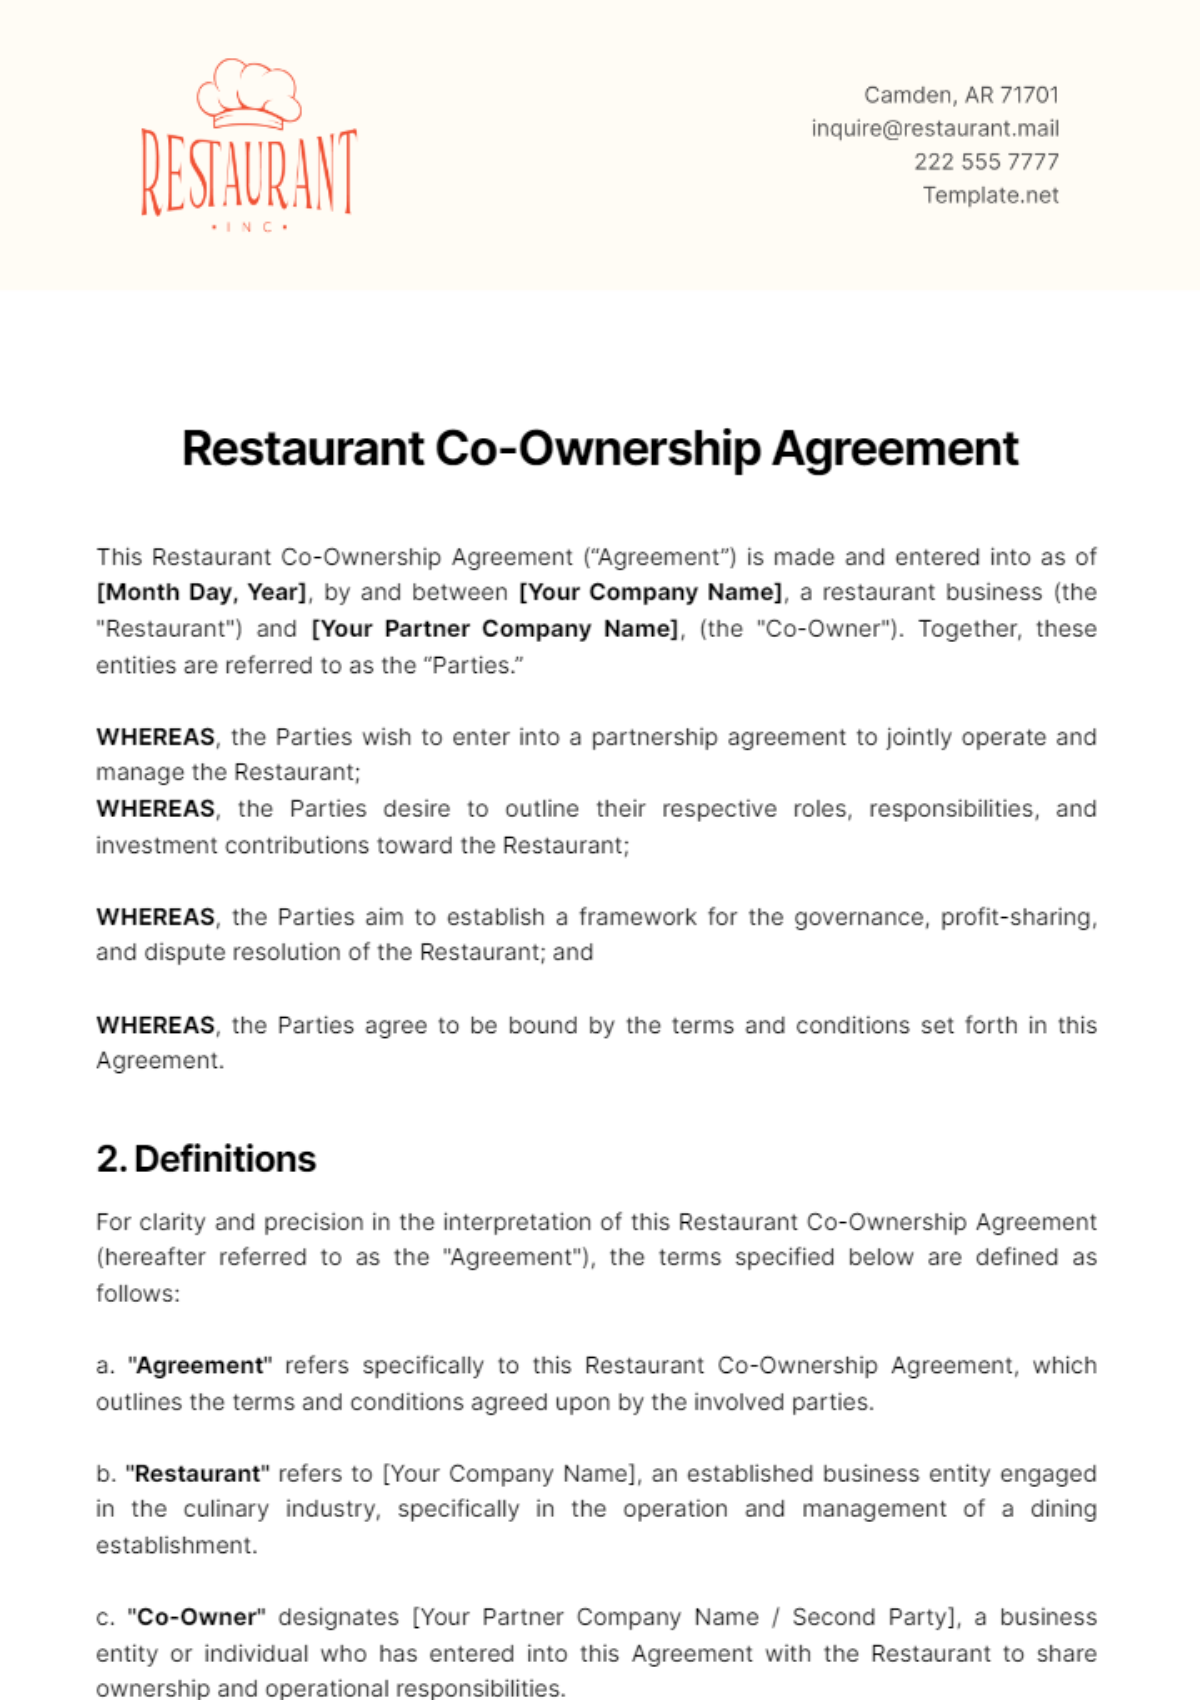 Restaurant Co-Ownership Agreement Template